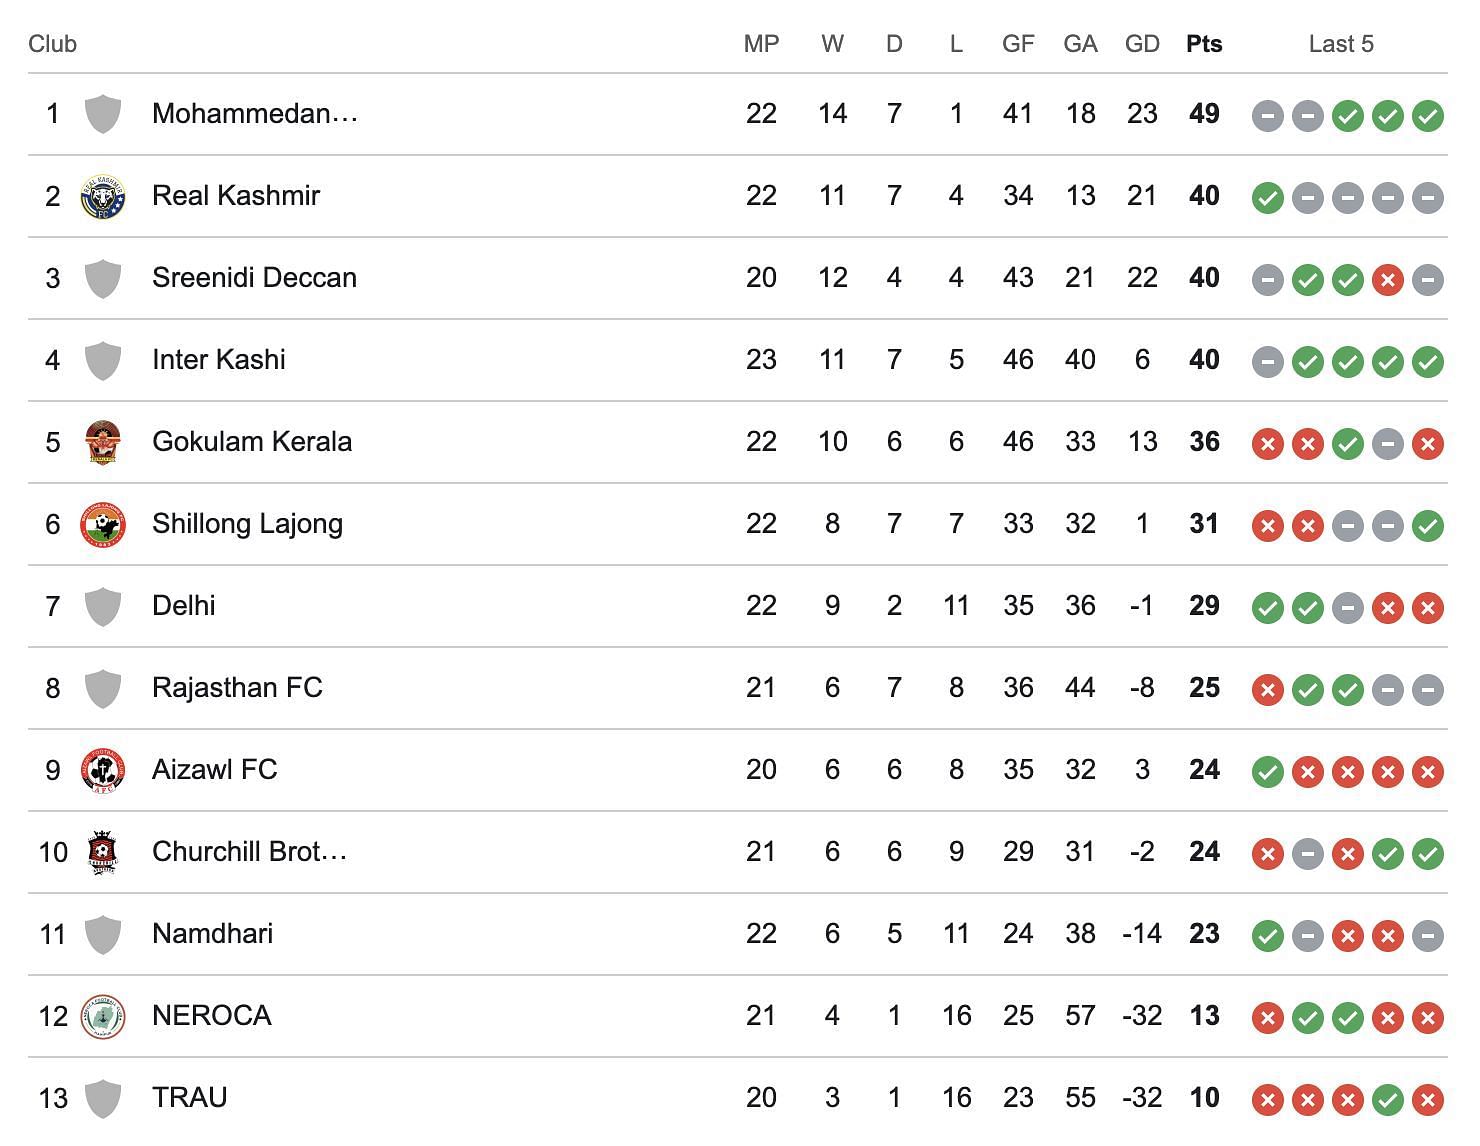 A look at the standings after the end of Mohammedan SC vs Inter Kashi.